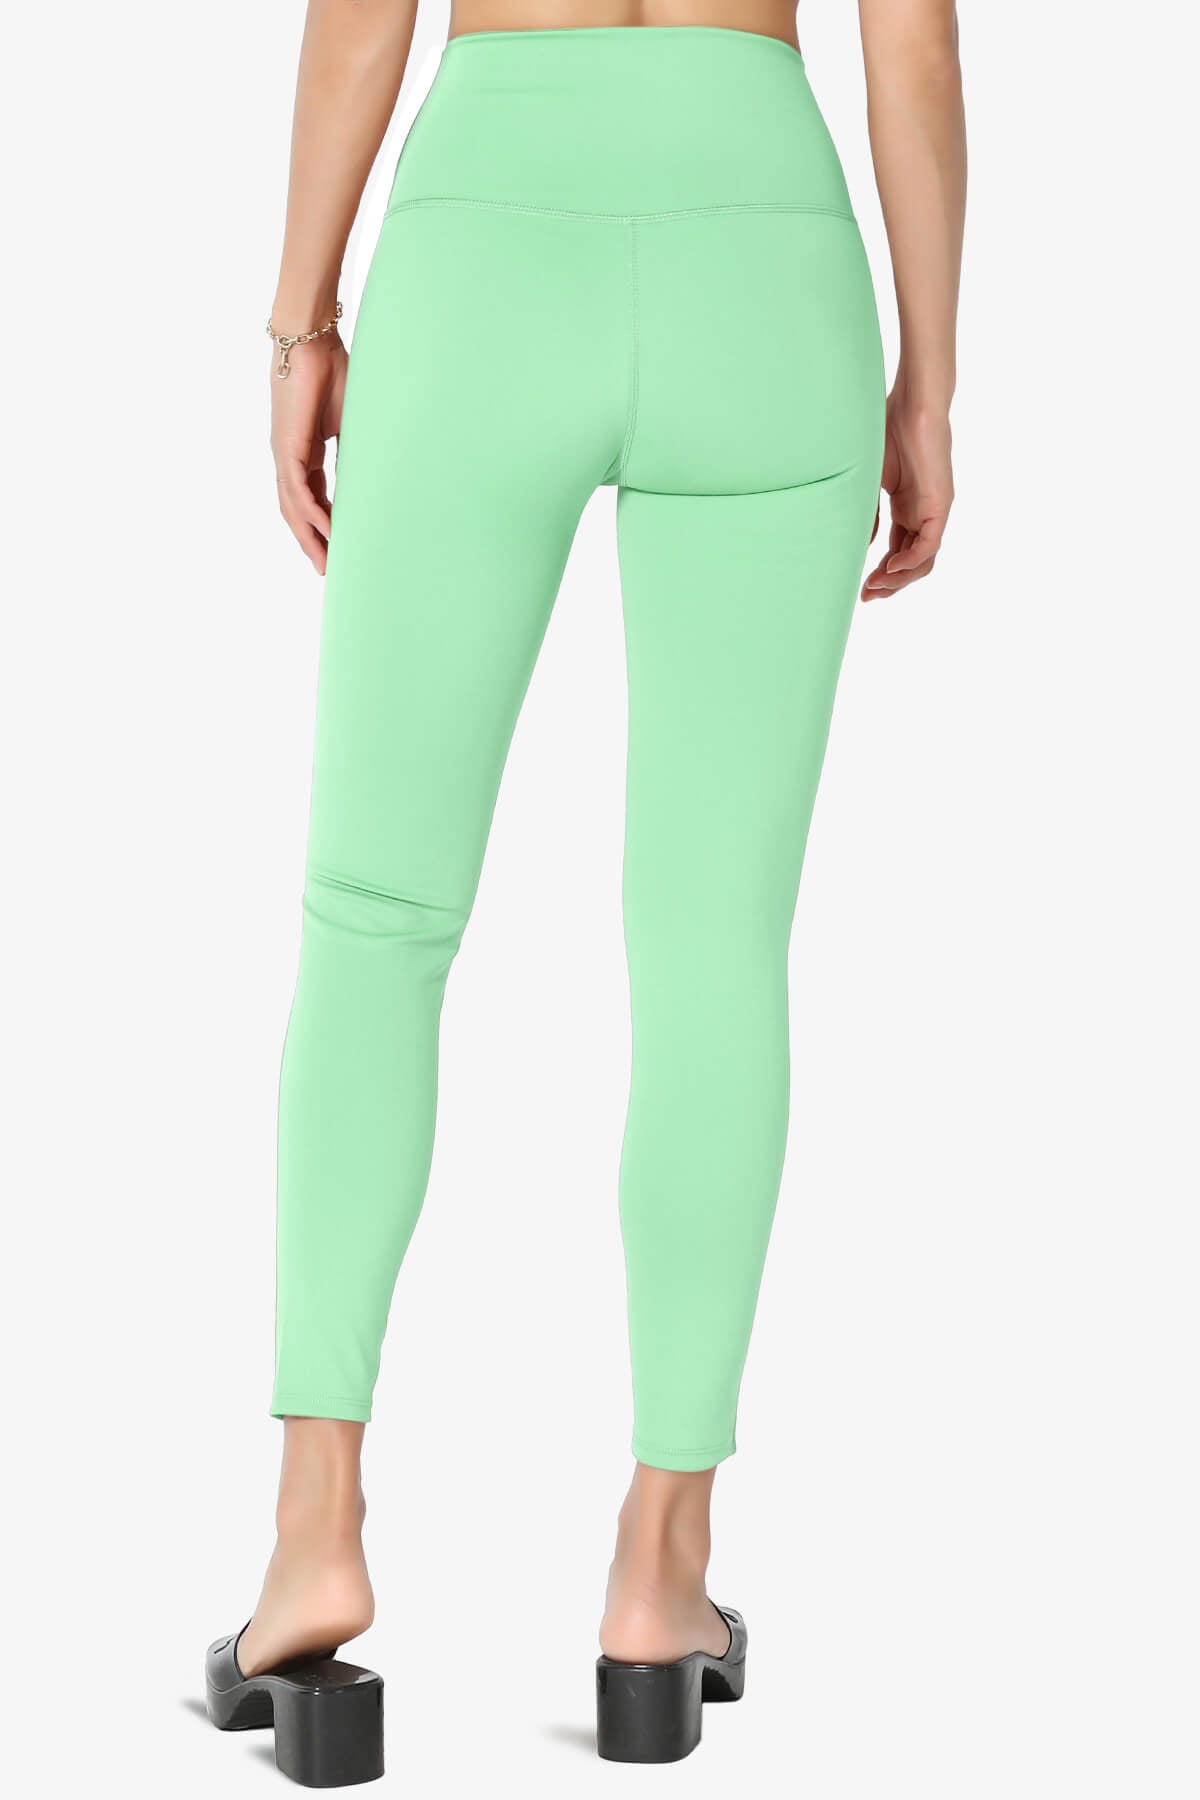 Load image into Gallery viewer, Mosco Athletic Tummy Control Workout Leggings GREEN MINT_4
